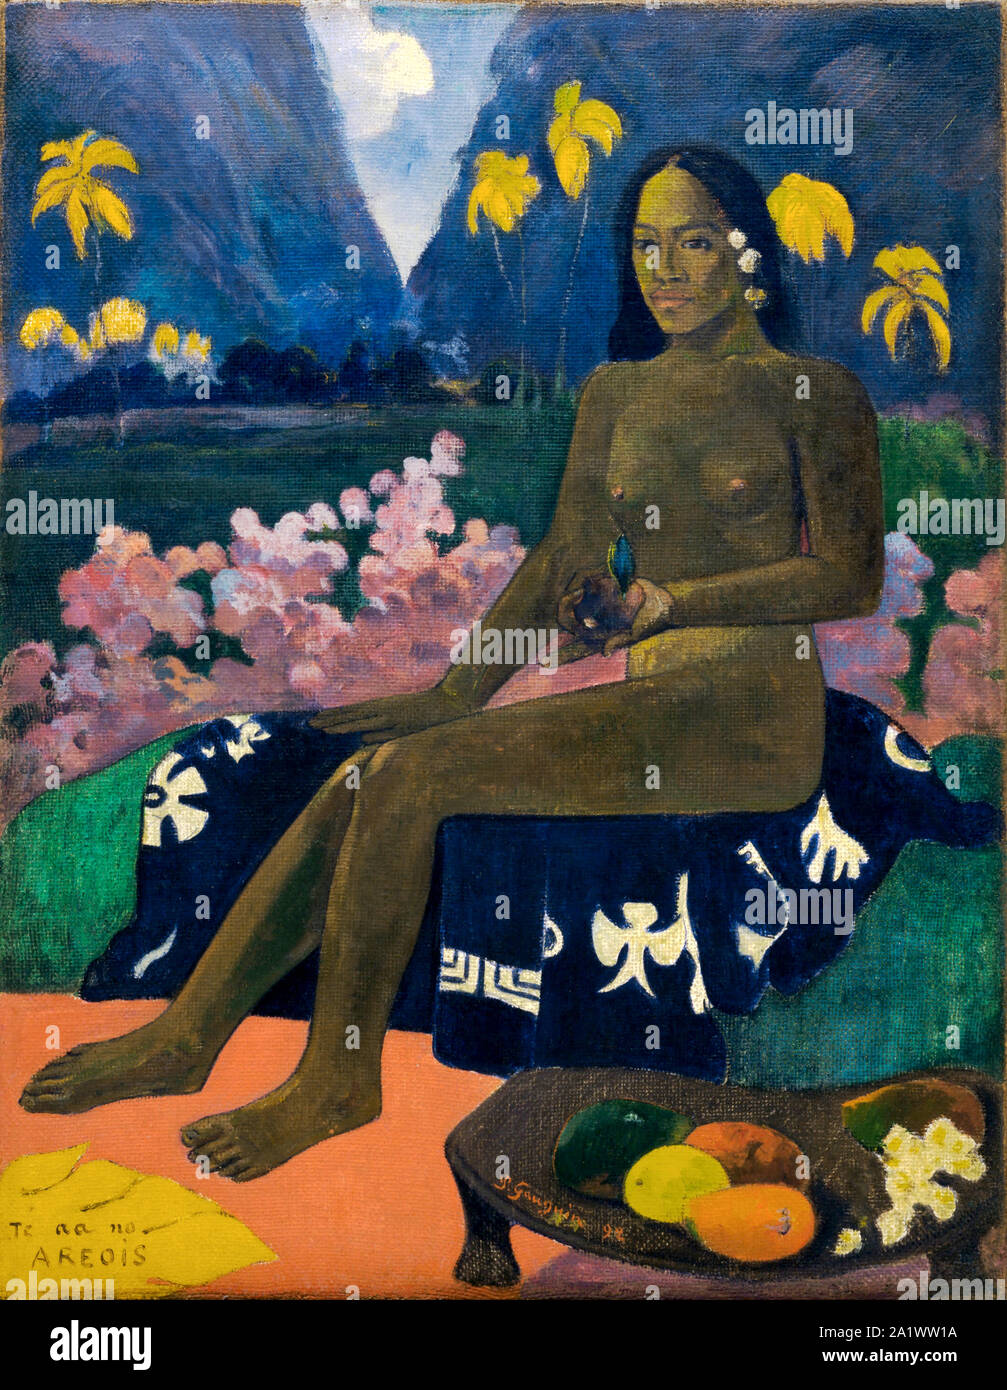 Te aa no areois (The Seed of the Areoi), 1892 by Paul Gauguin Stock Photo